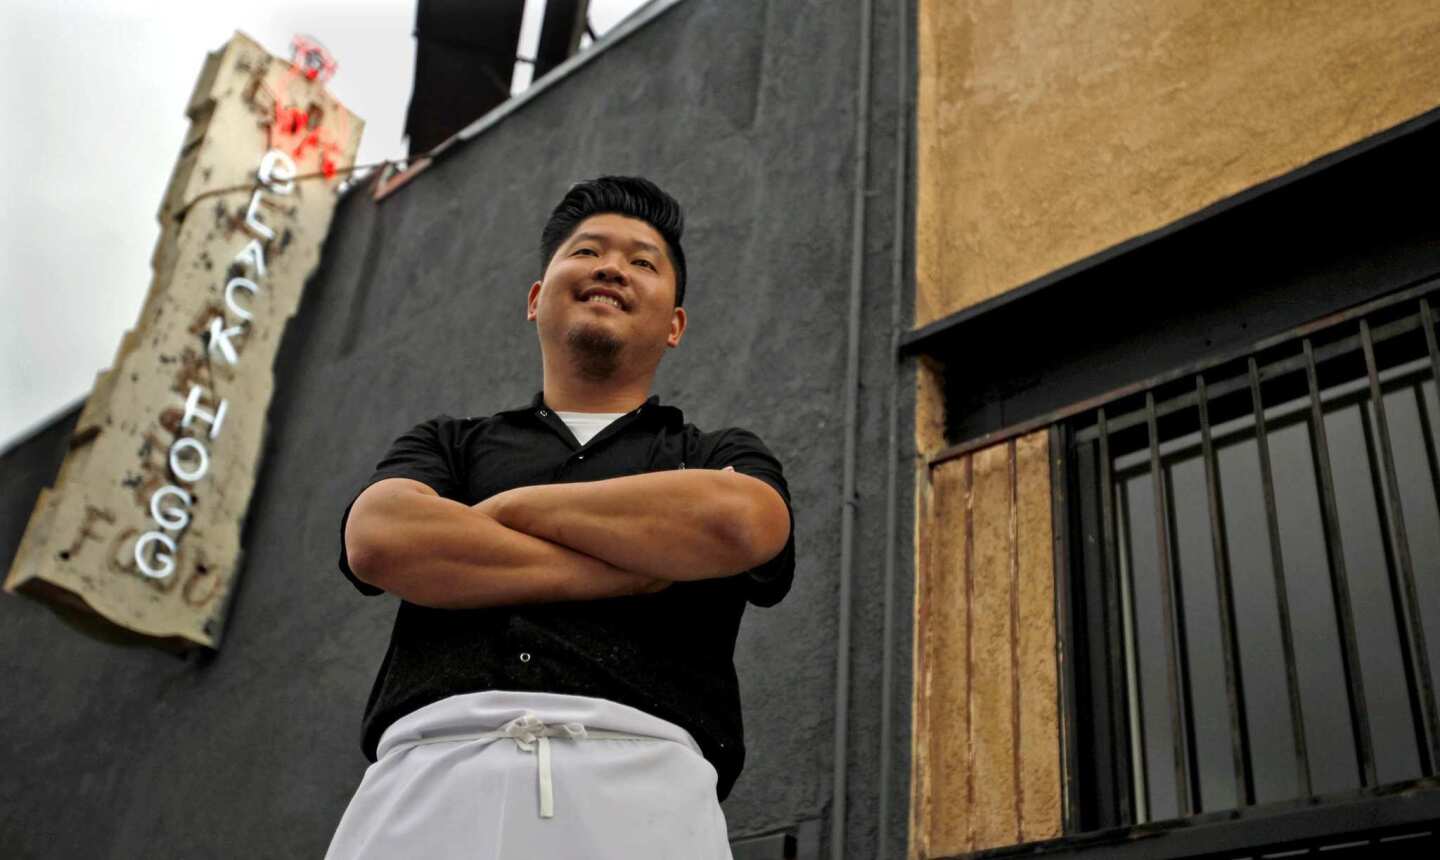 Eric Park is chef and owner of the new Silver Lake restaurant called Black Hogg. It's awaiting a wine and beer license.